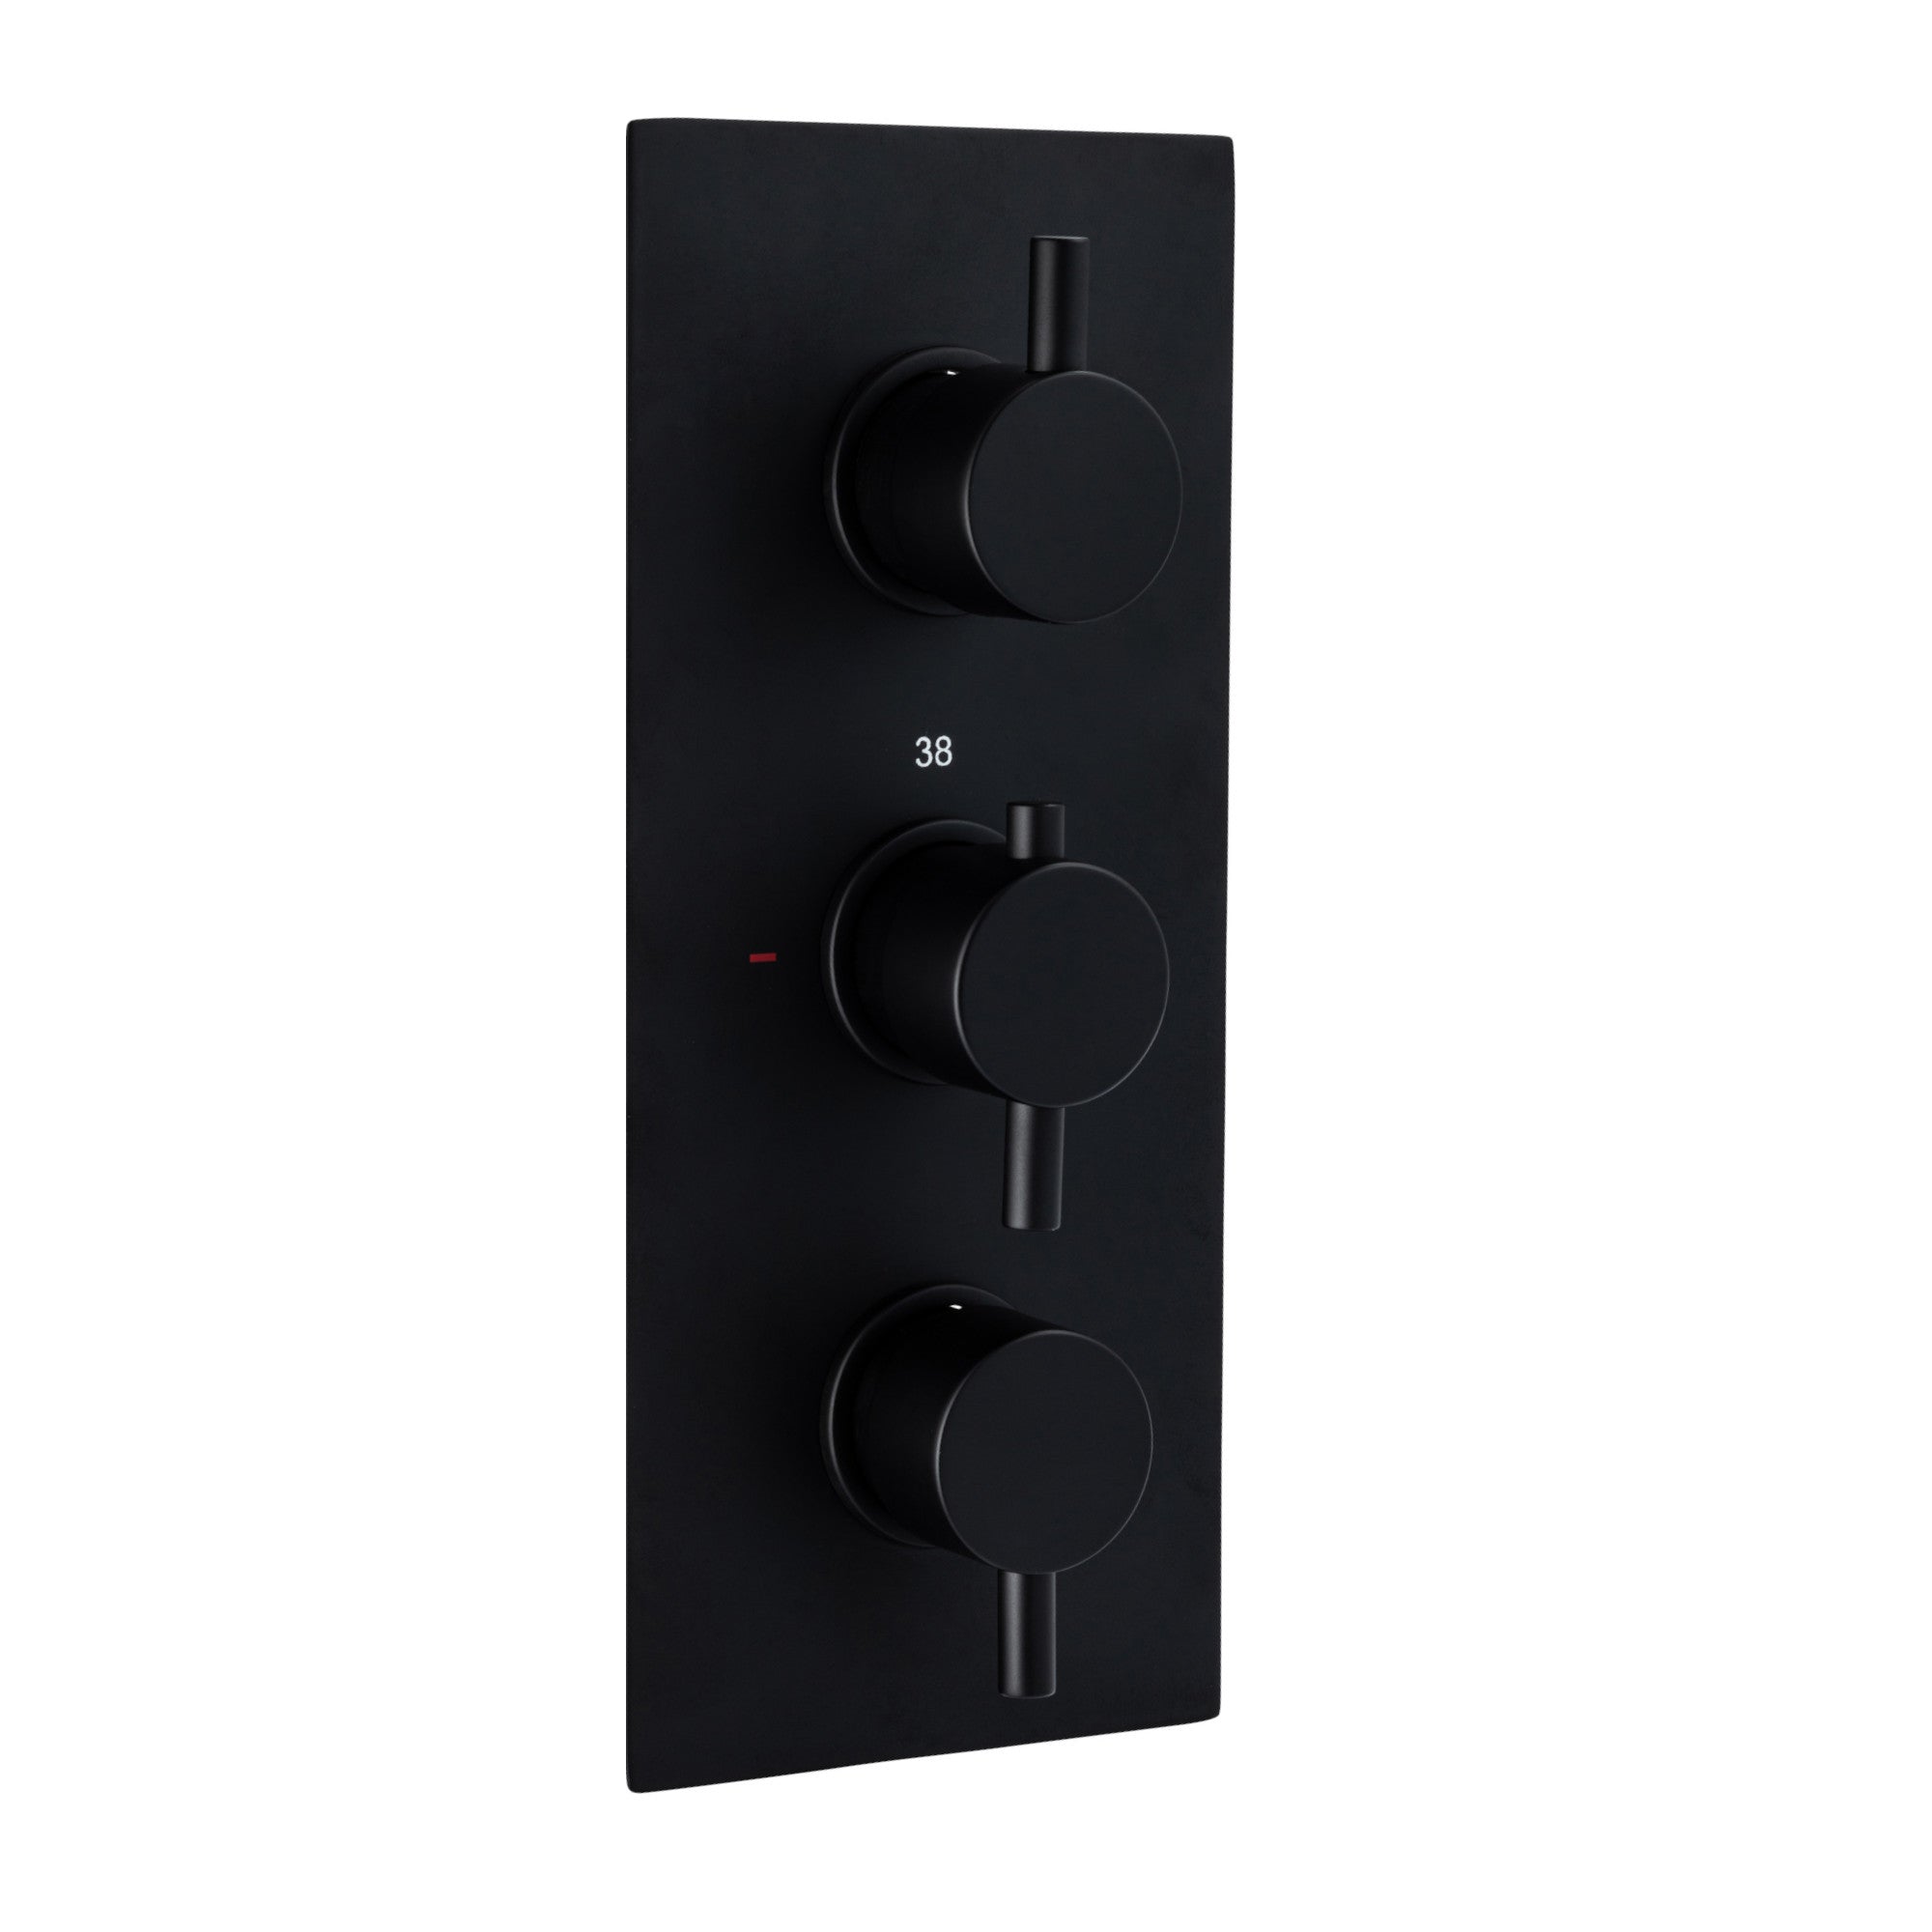 Venice contemporary round concealed thermostatic triple shower valve with 3 outlets - matte black